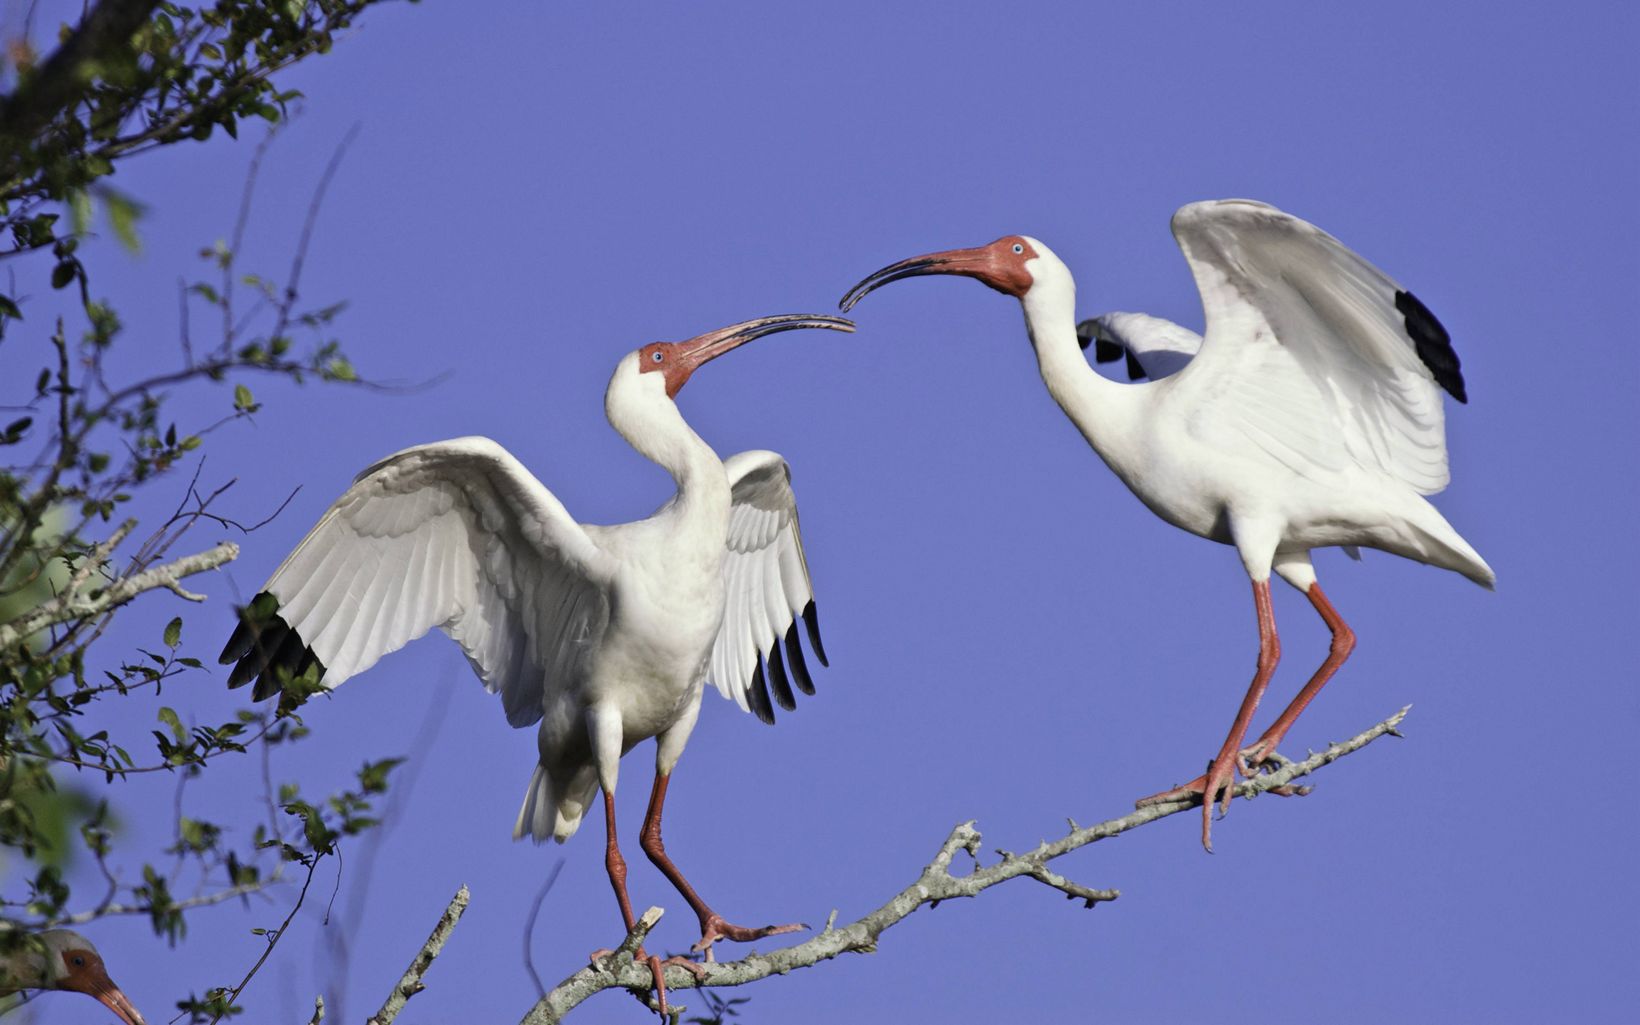 Two big white birds stand on a branch and connect via long beaks.